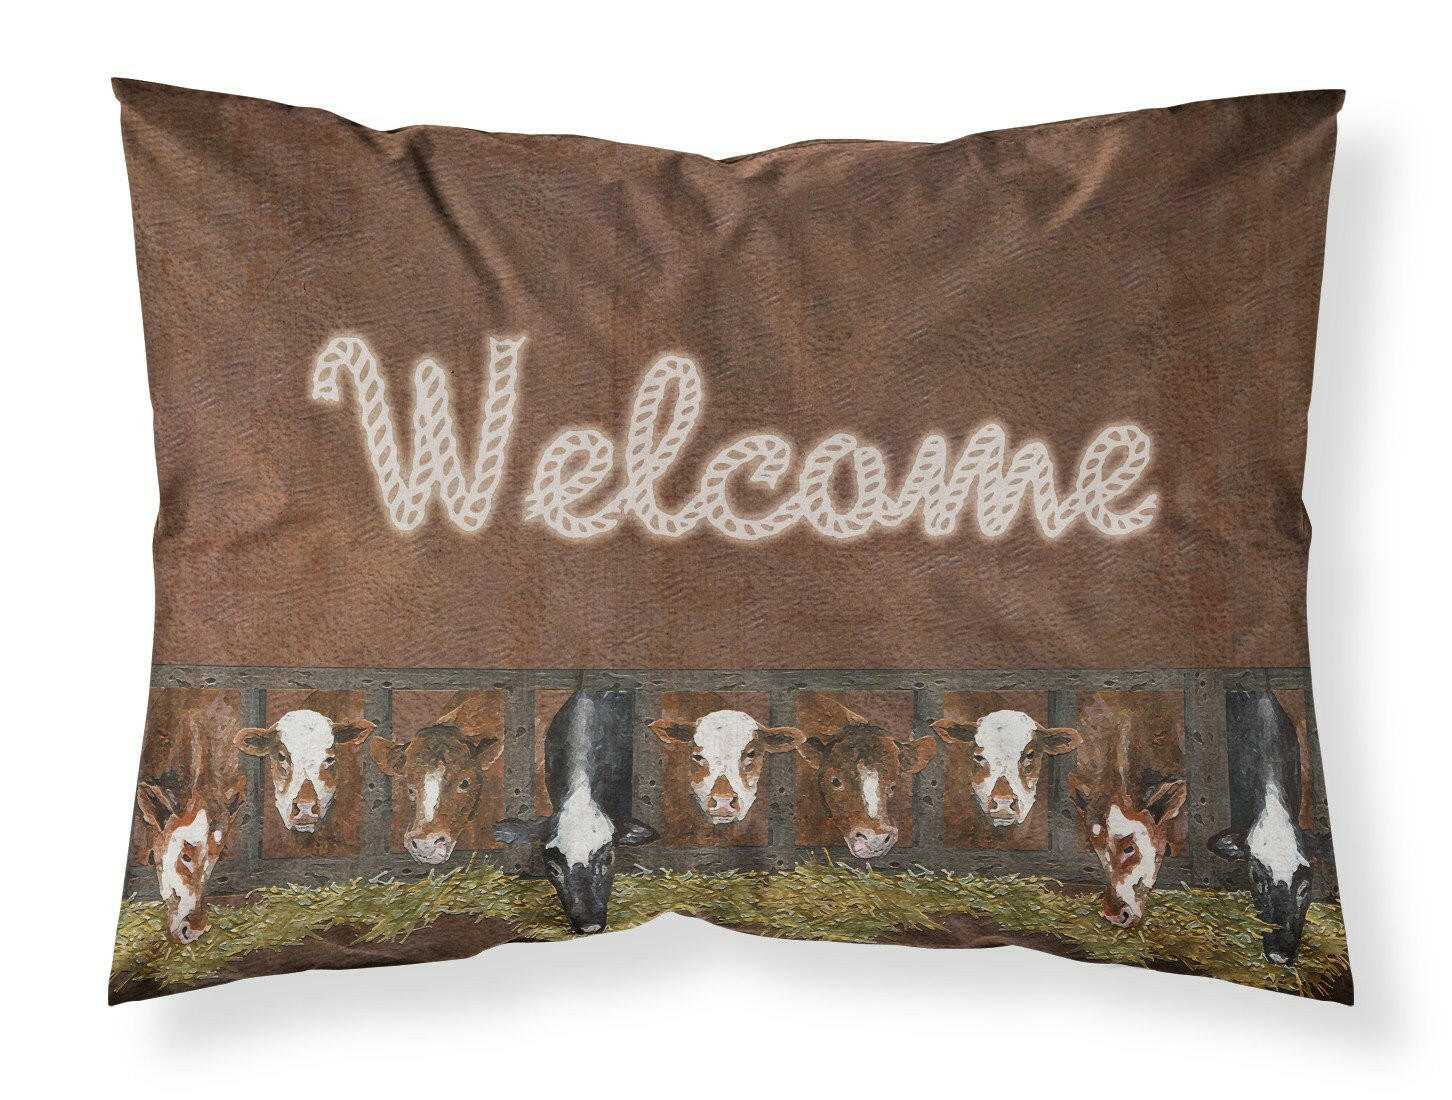 Welcome Mat with Cows Moisture wicking Fabric standard pillowcase SB3058PILLOWCASE by Caroline's Treasures